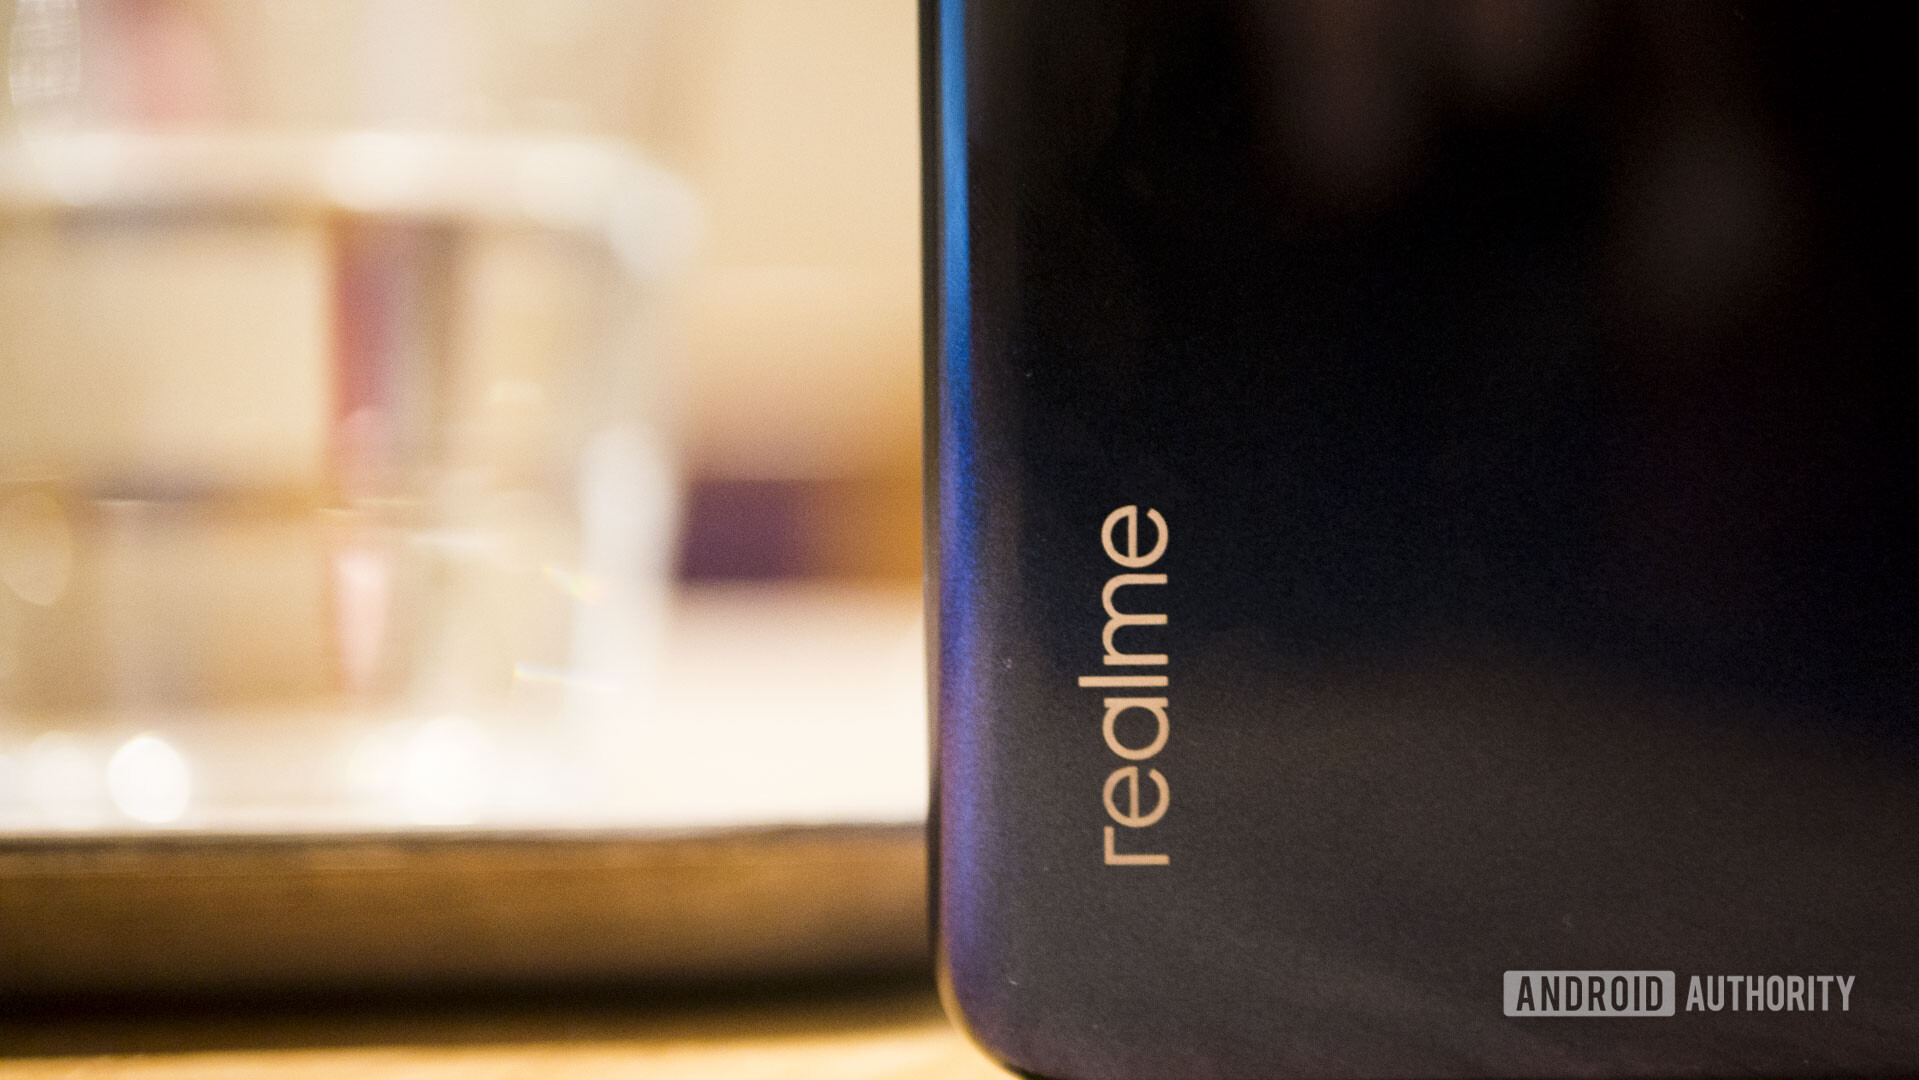 Backside of the Realme 3 focusing on the logo